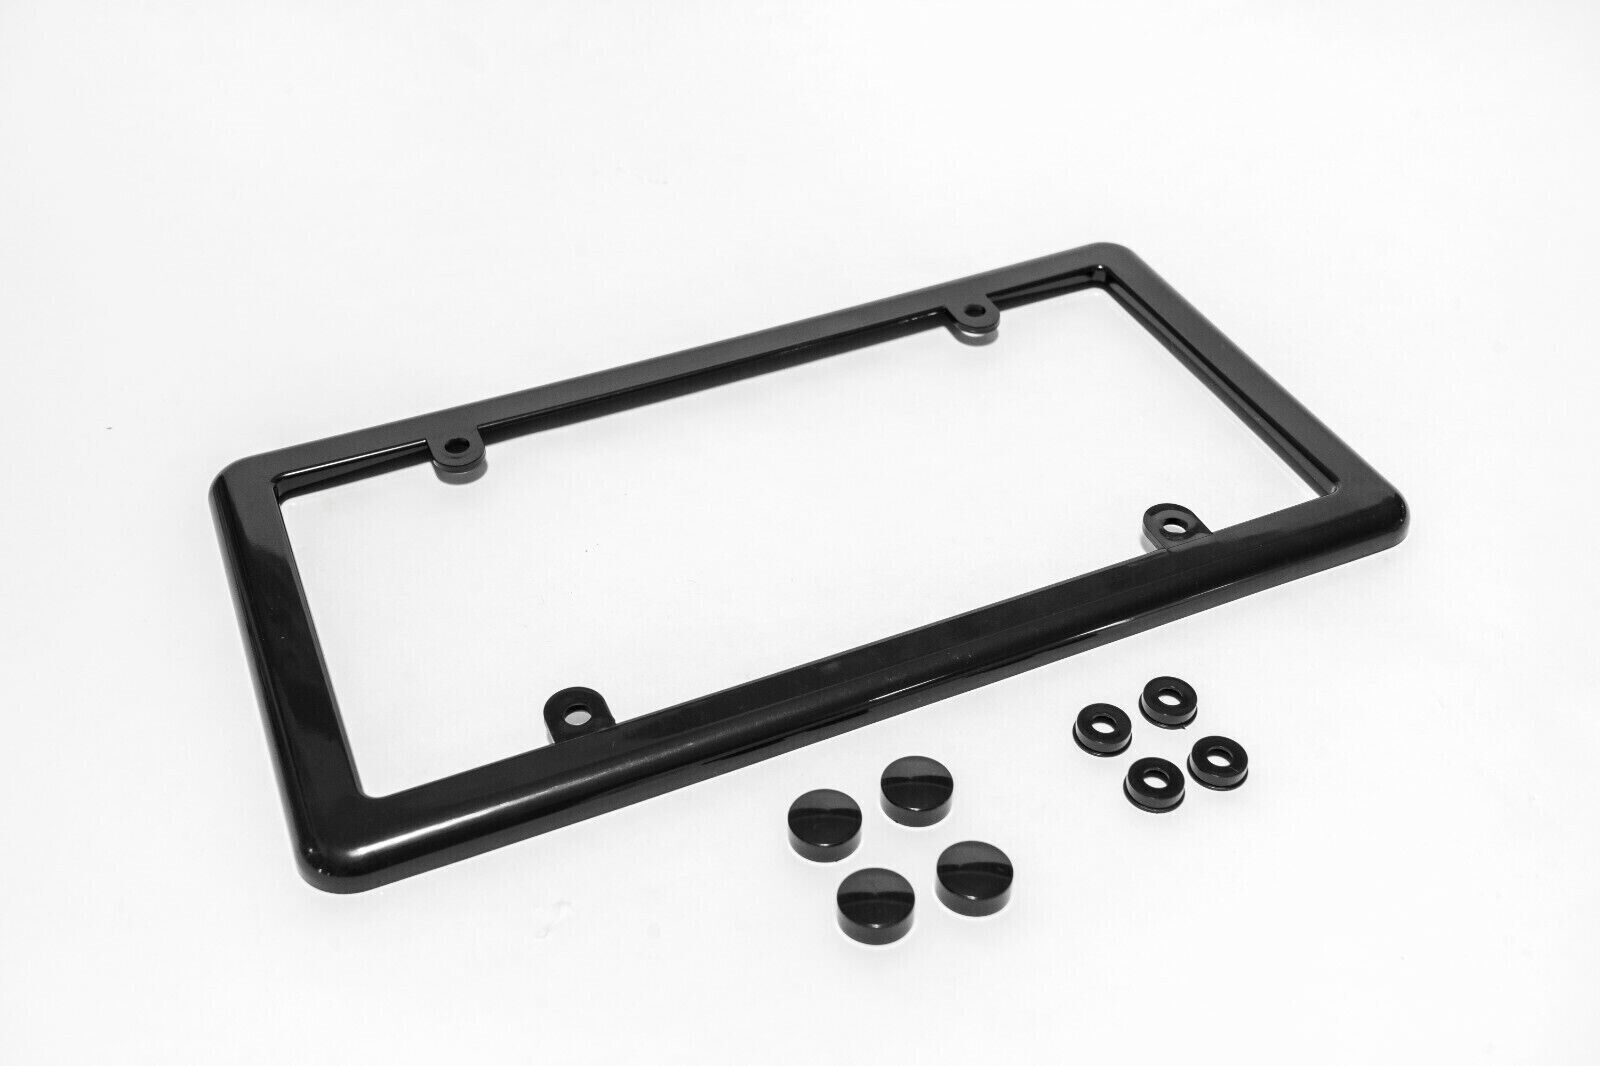 Universal Black License Plate Tag Mounting Holder Frame + 4 Screw Caps Brand New